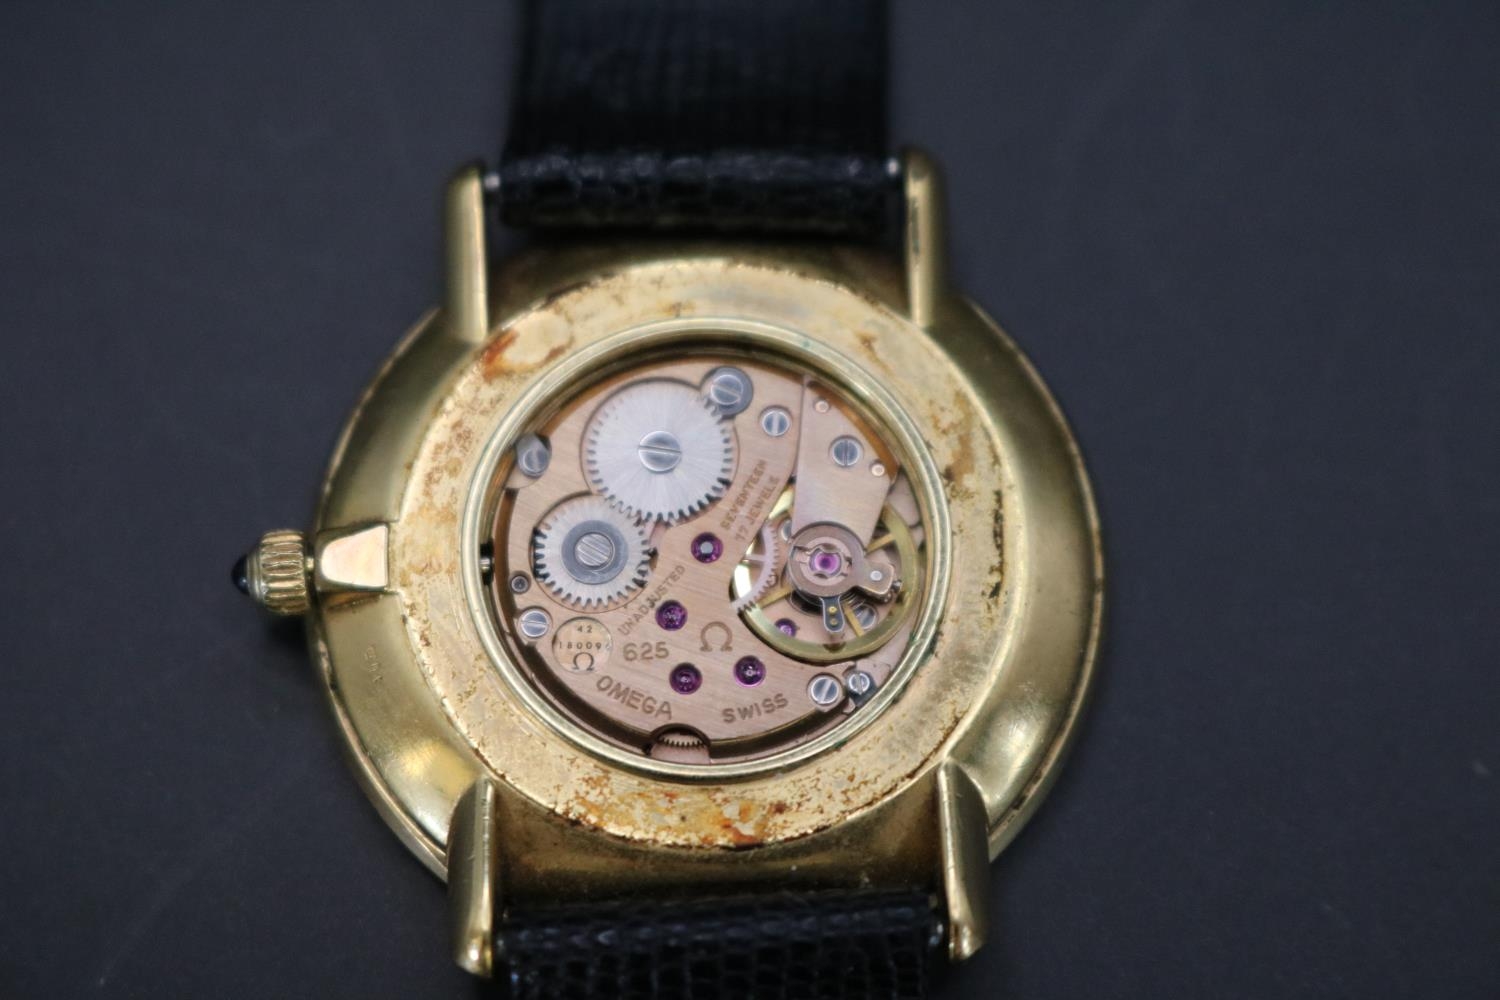 Omega De Ville gents gold plated 17 jewel, 20 micron manual wind Swiss movement dress watch with - Image 4 of 5